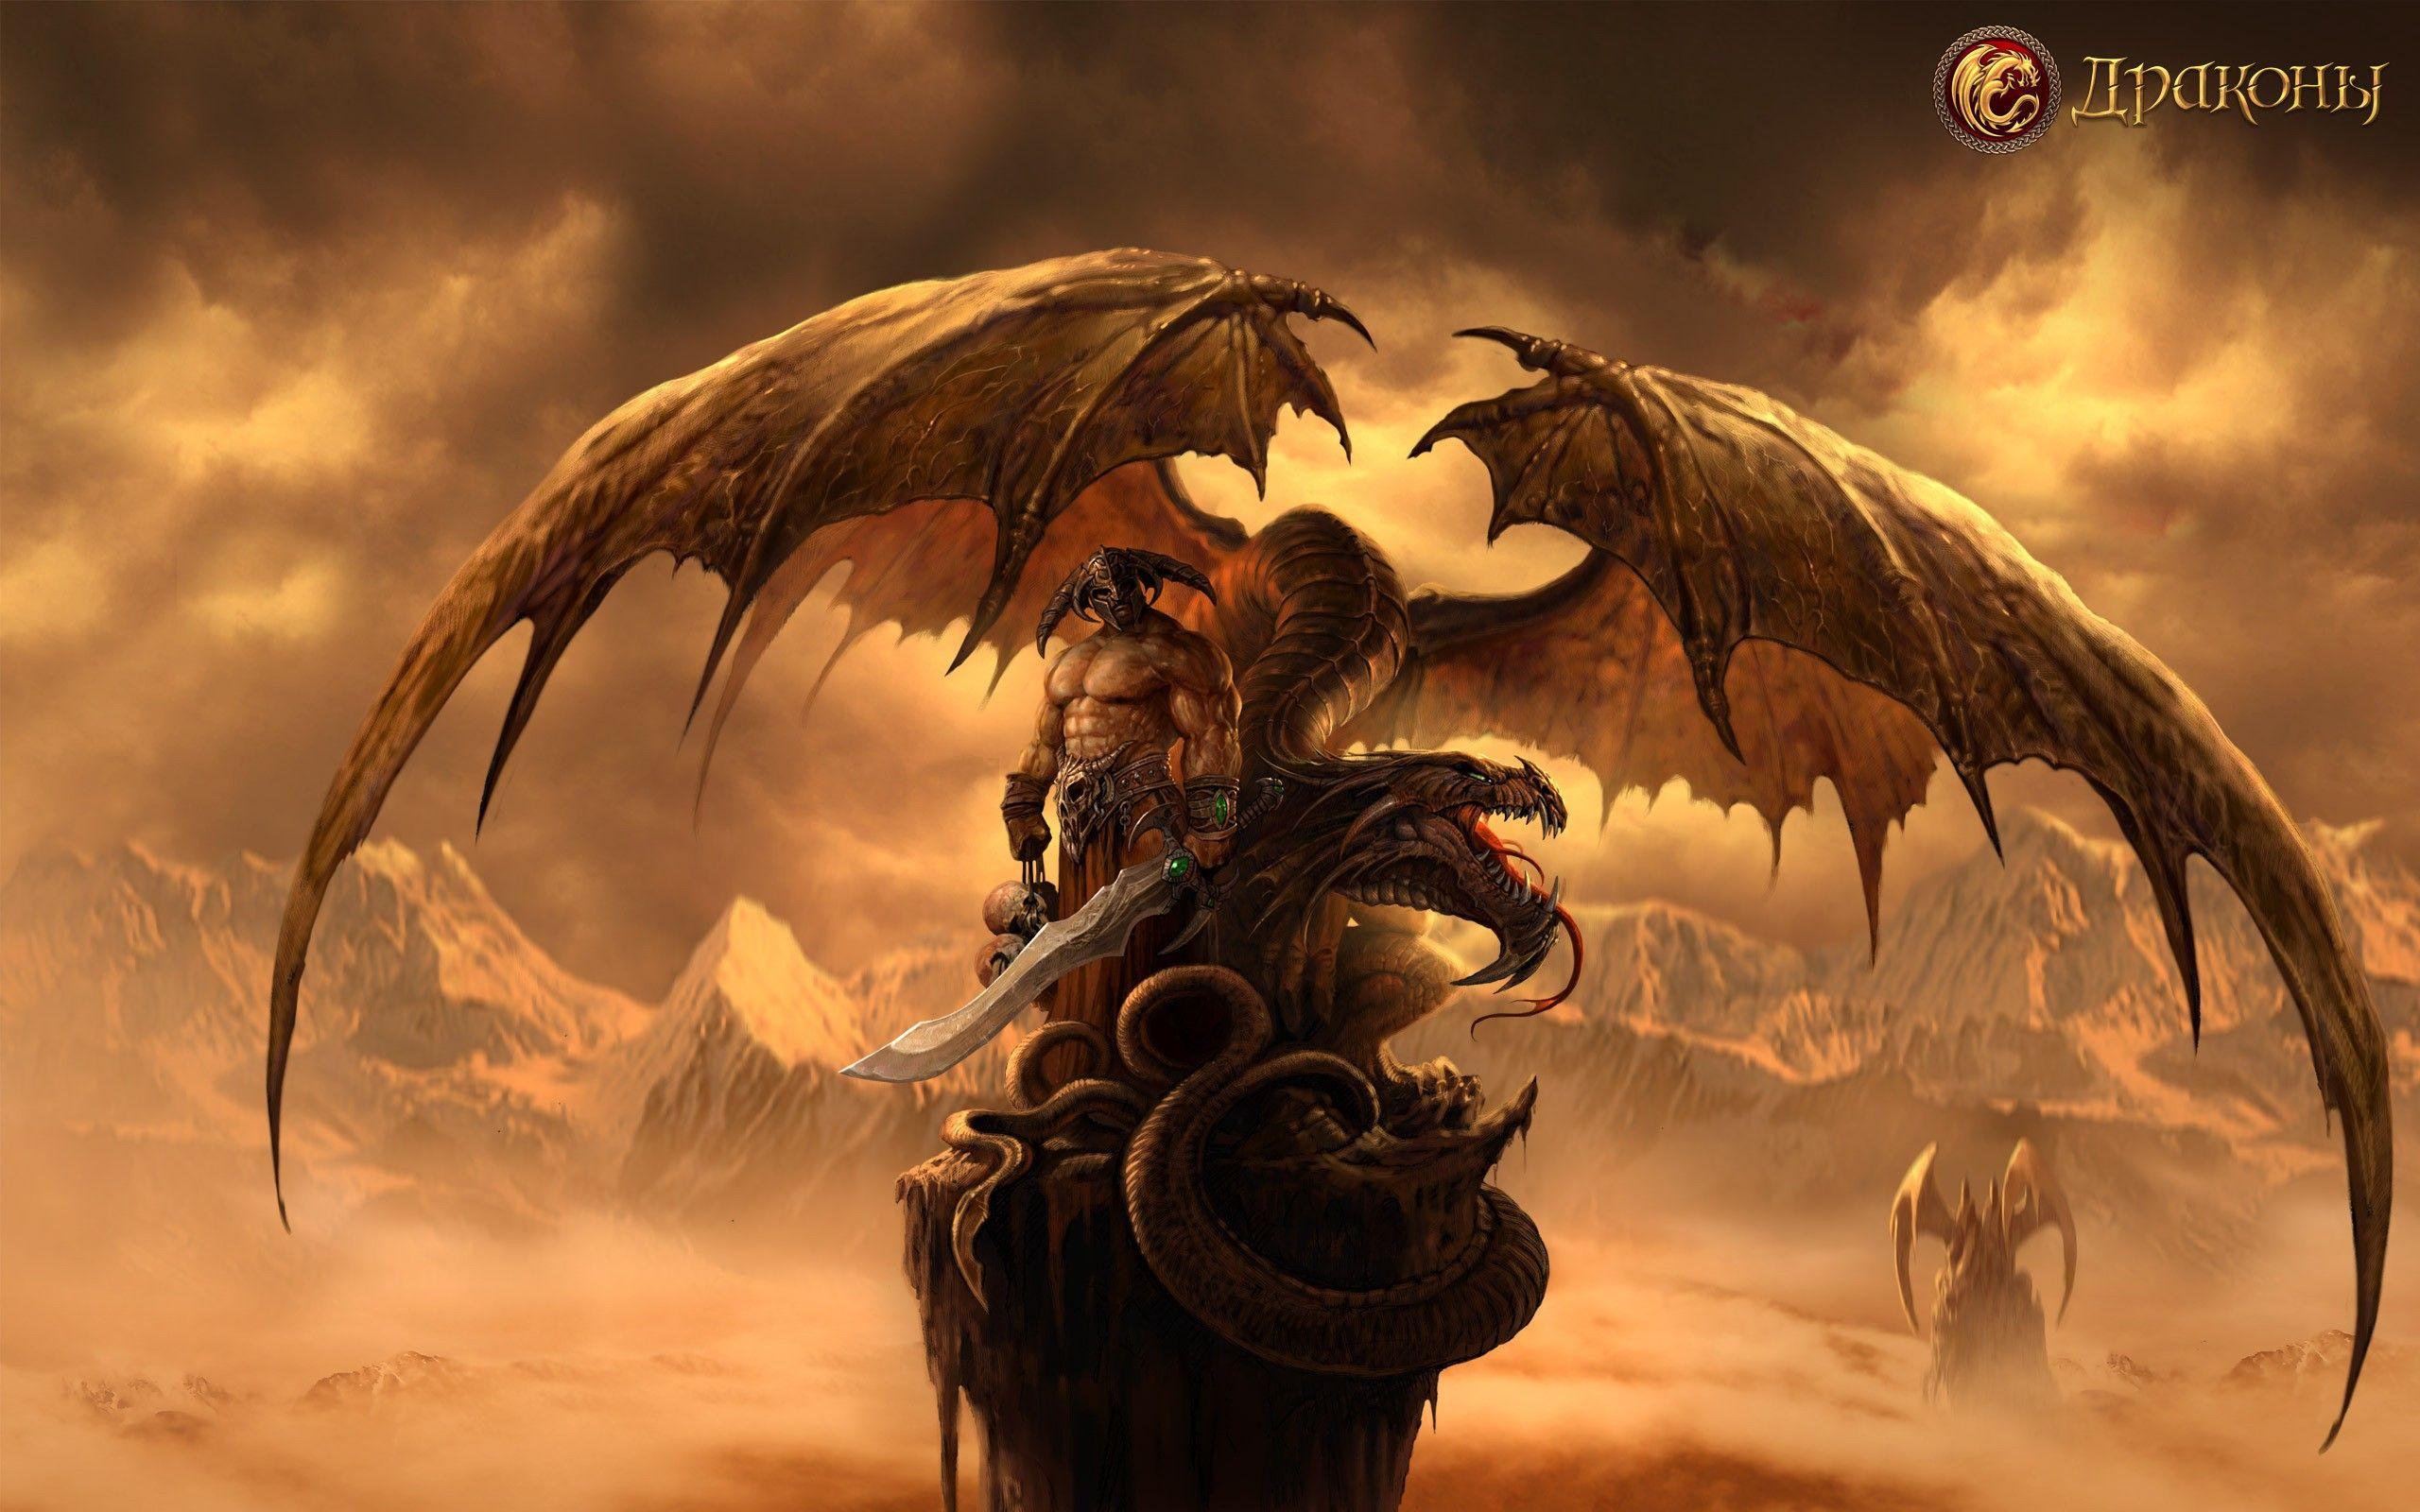 Download the Valley of Dragons Wallpaper, Valley of Dragons iPhone